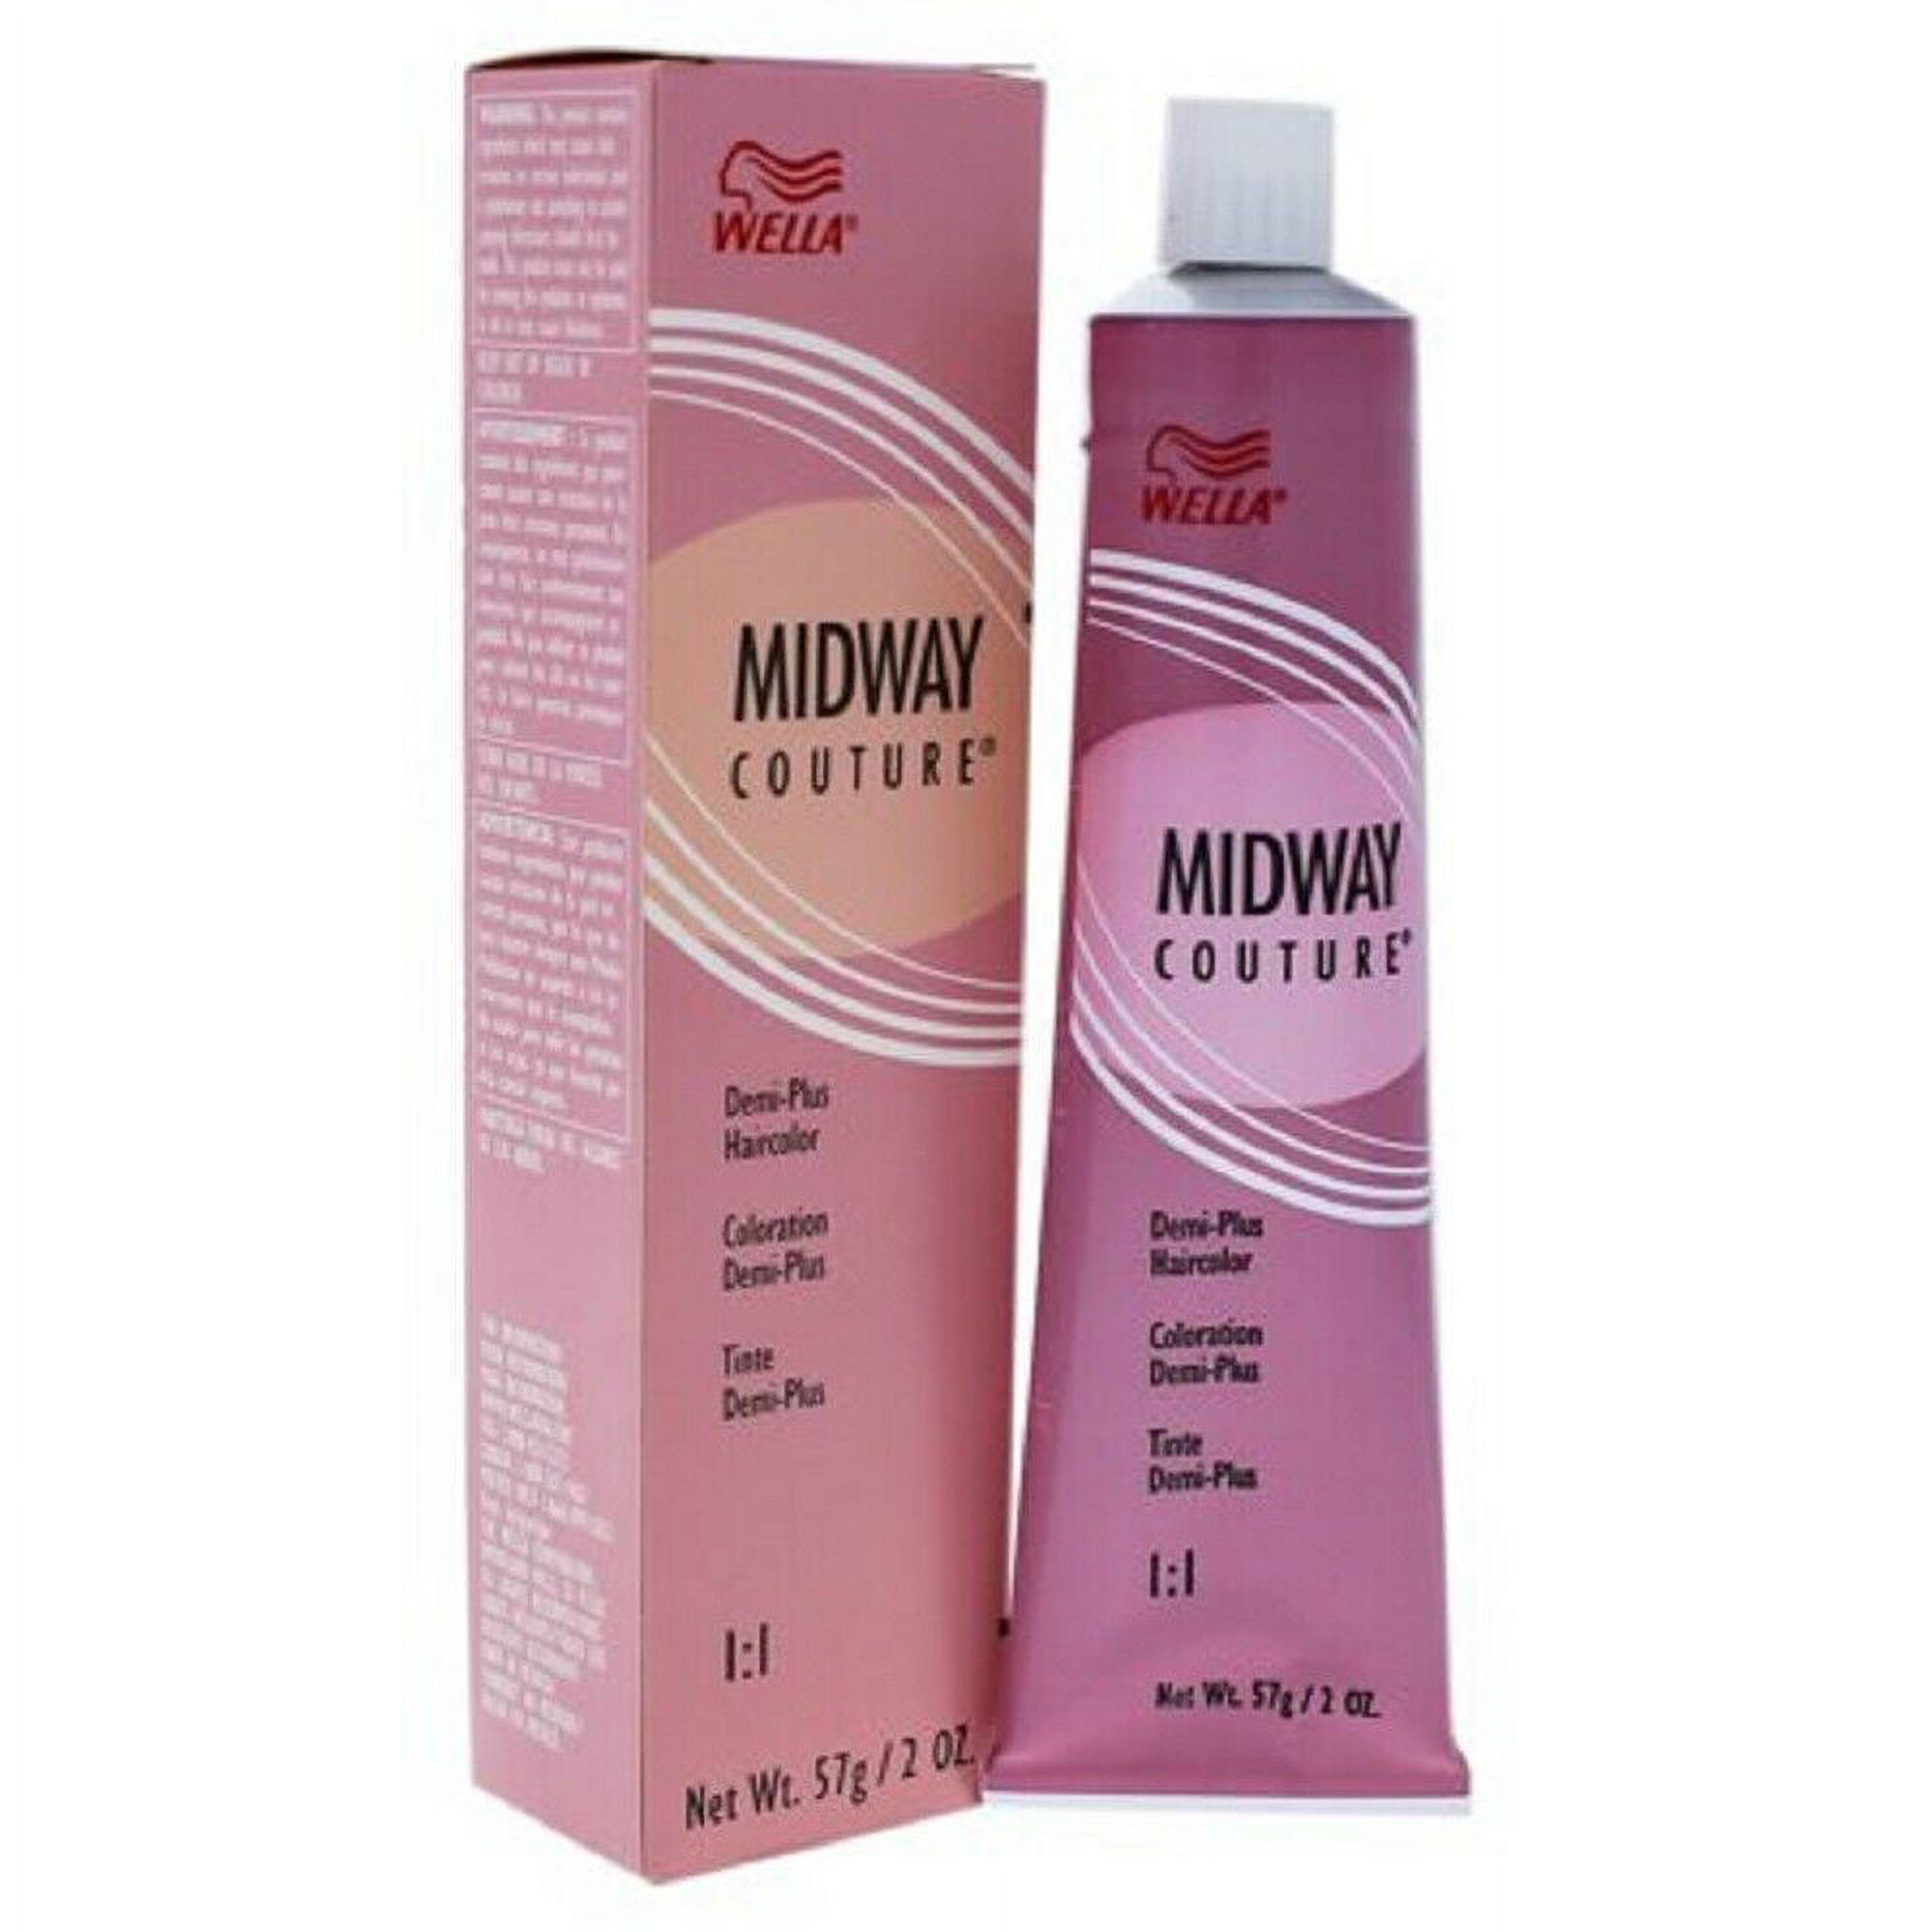 Wella Midway Coutour Demi Permanent Hair Color 2oz., Choose your Shade ( Shade:7/8G Golden Blonde;) - image 1 of 1